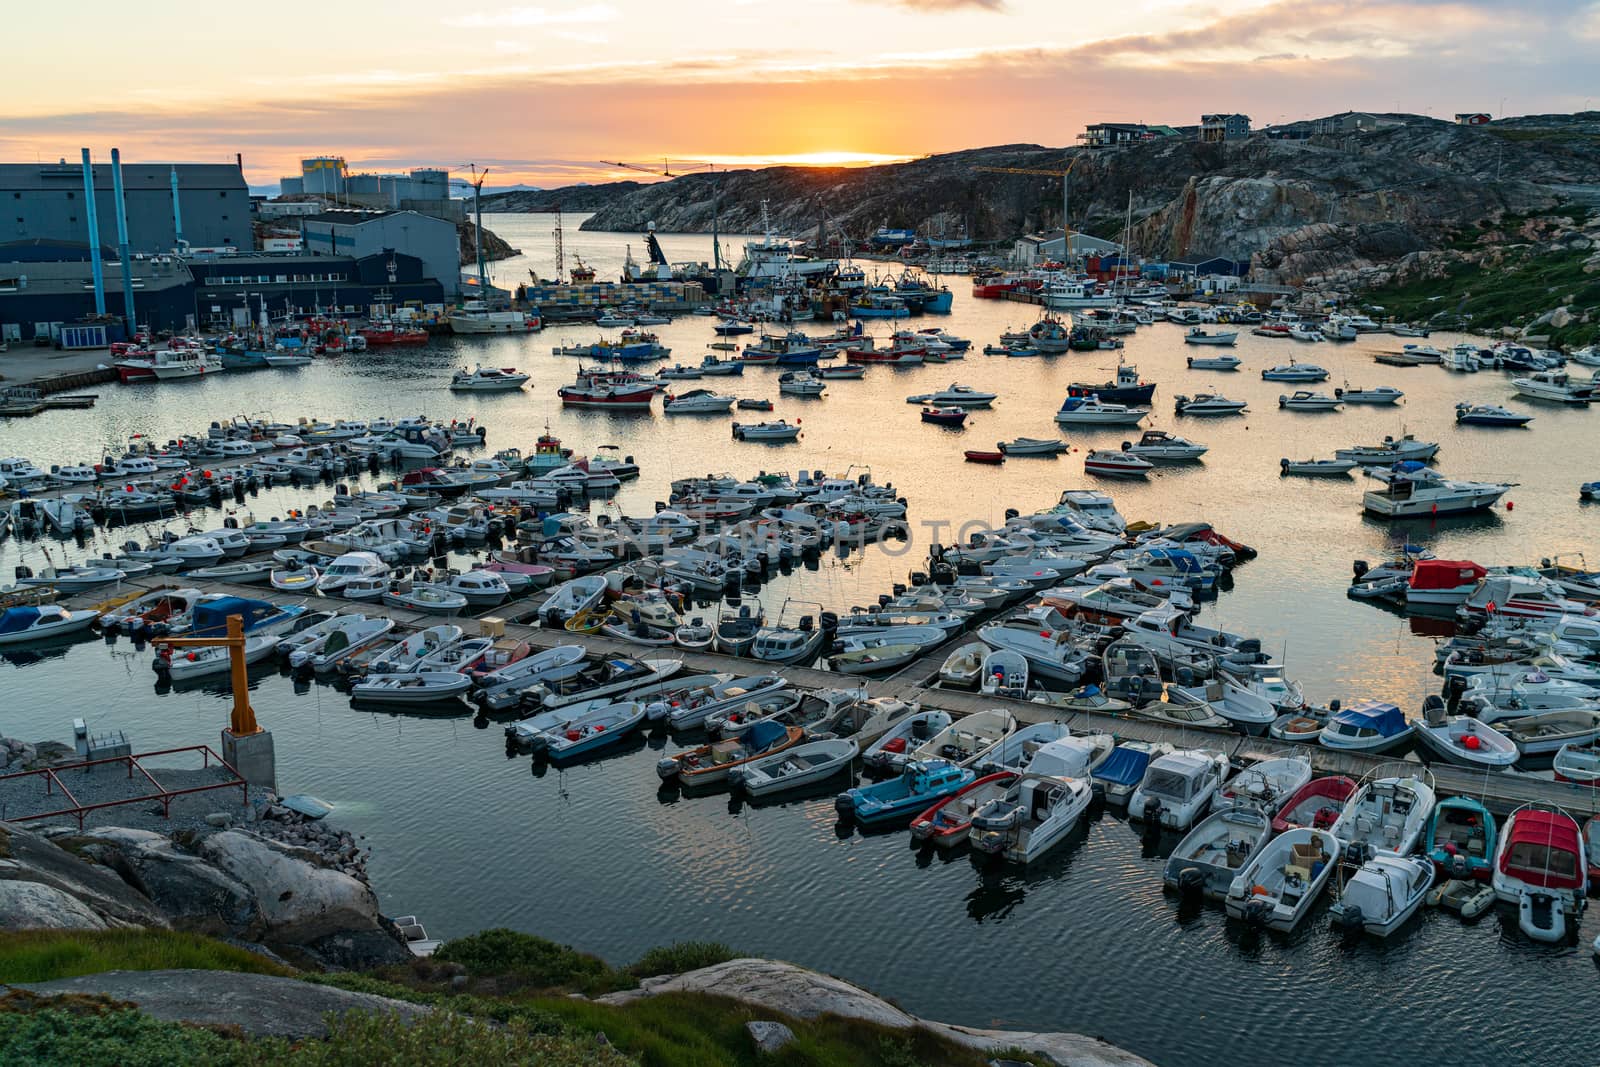 Greenland Ilulissat cruise ship harbor and boat harbour in famous Greenland tourist destination. Sunset city and water view of city in Disko Bay.